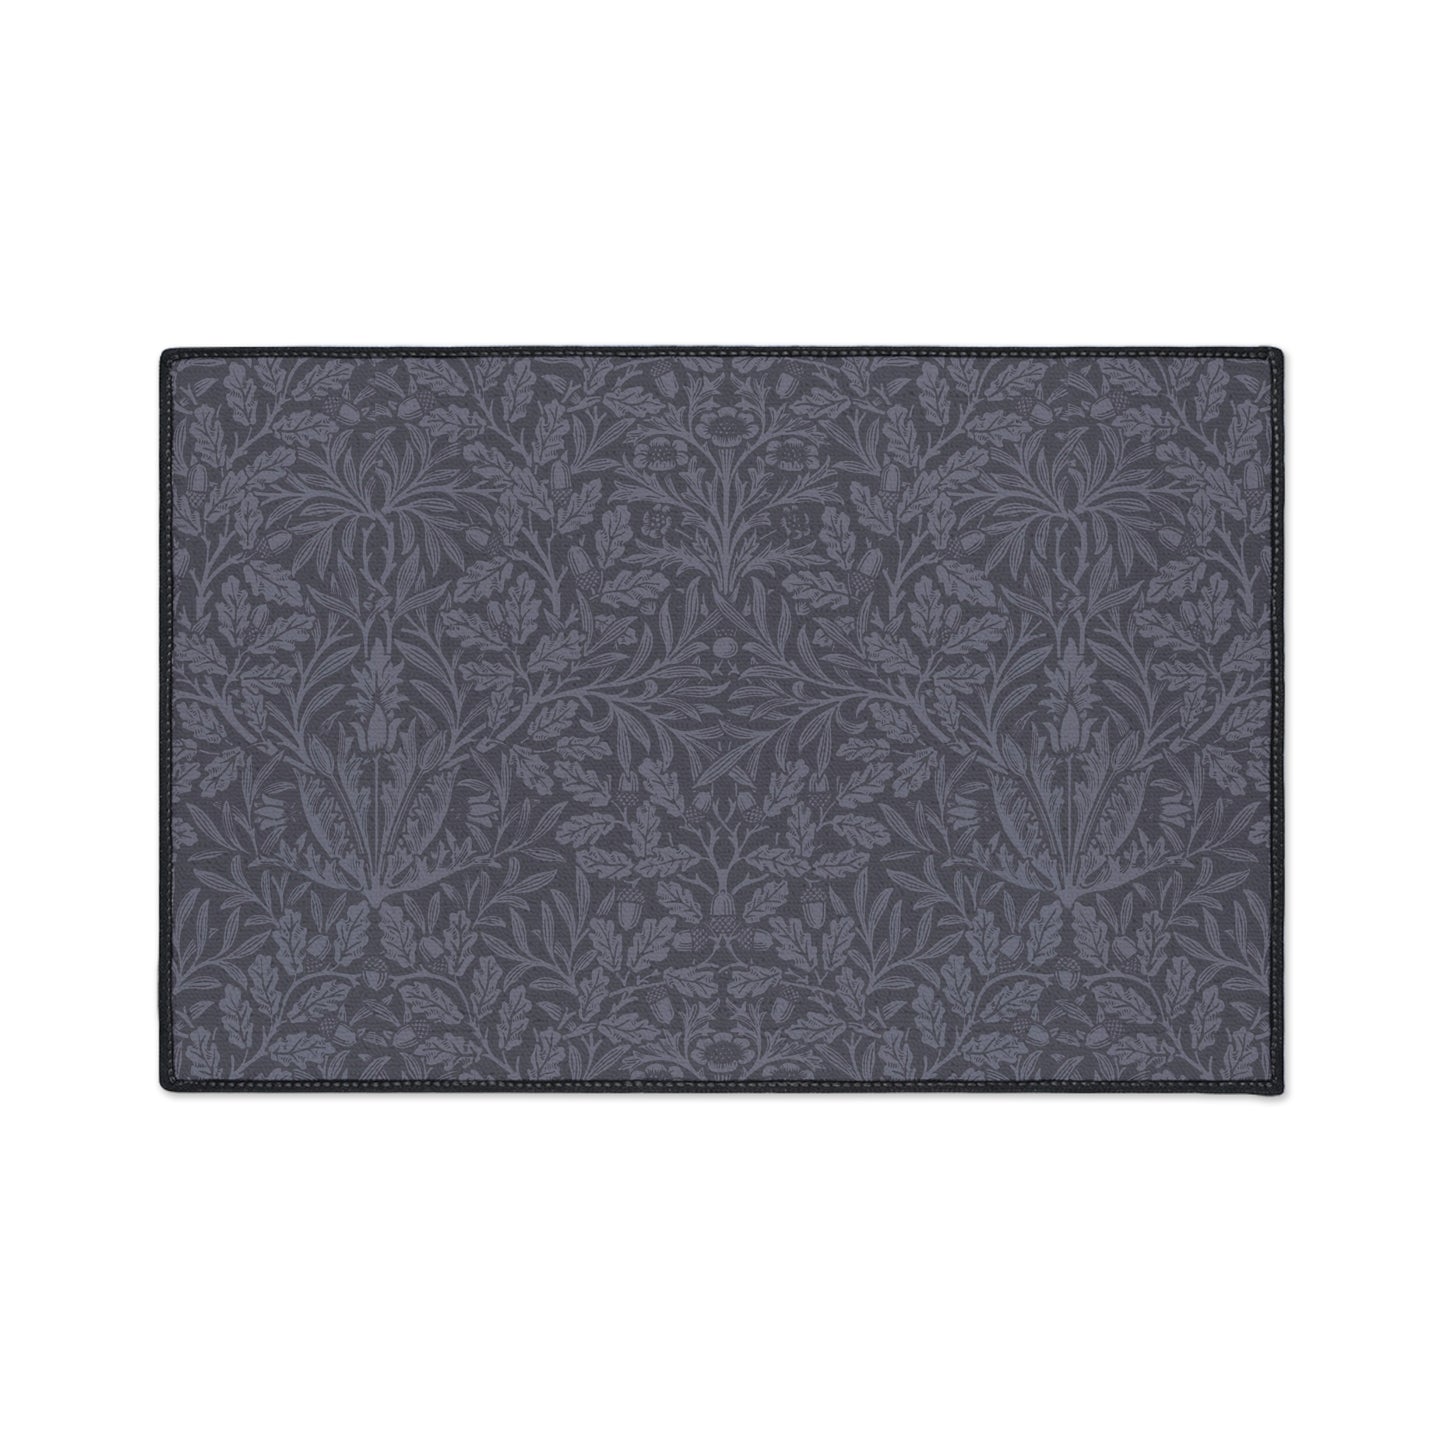 william-morris-co-heavy-duty-floor-mat-acorns-and-oak-leaves-collection-smoky-blue-6